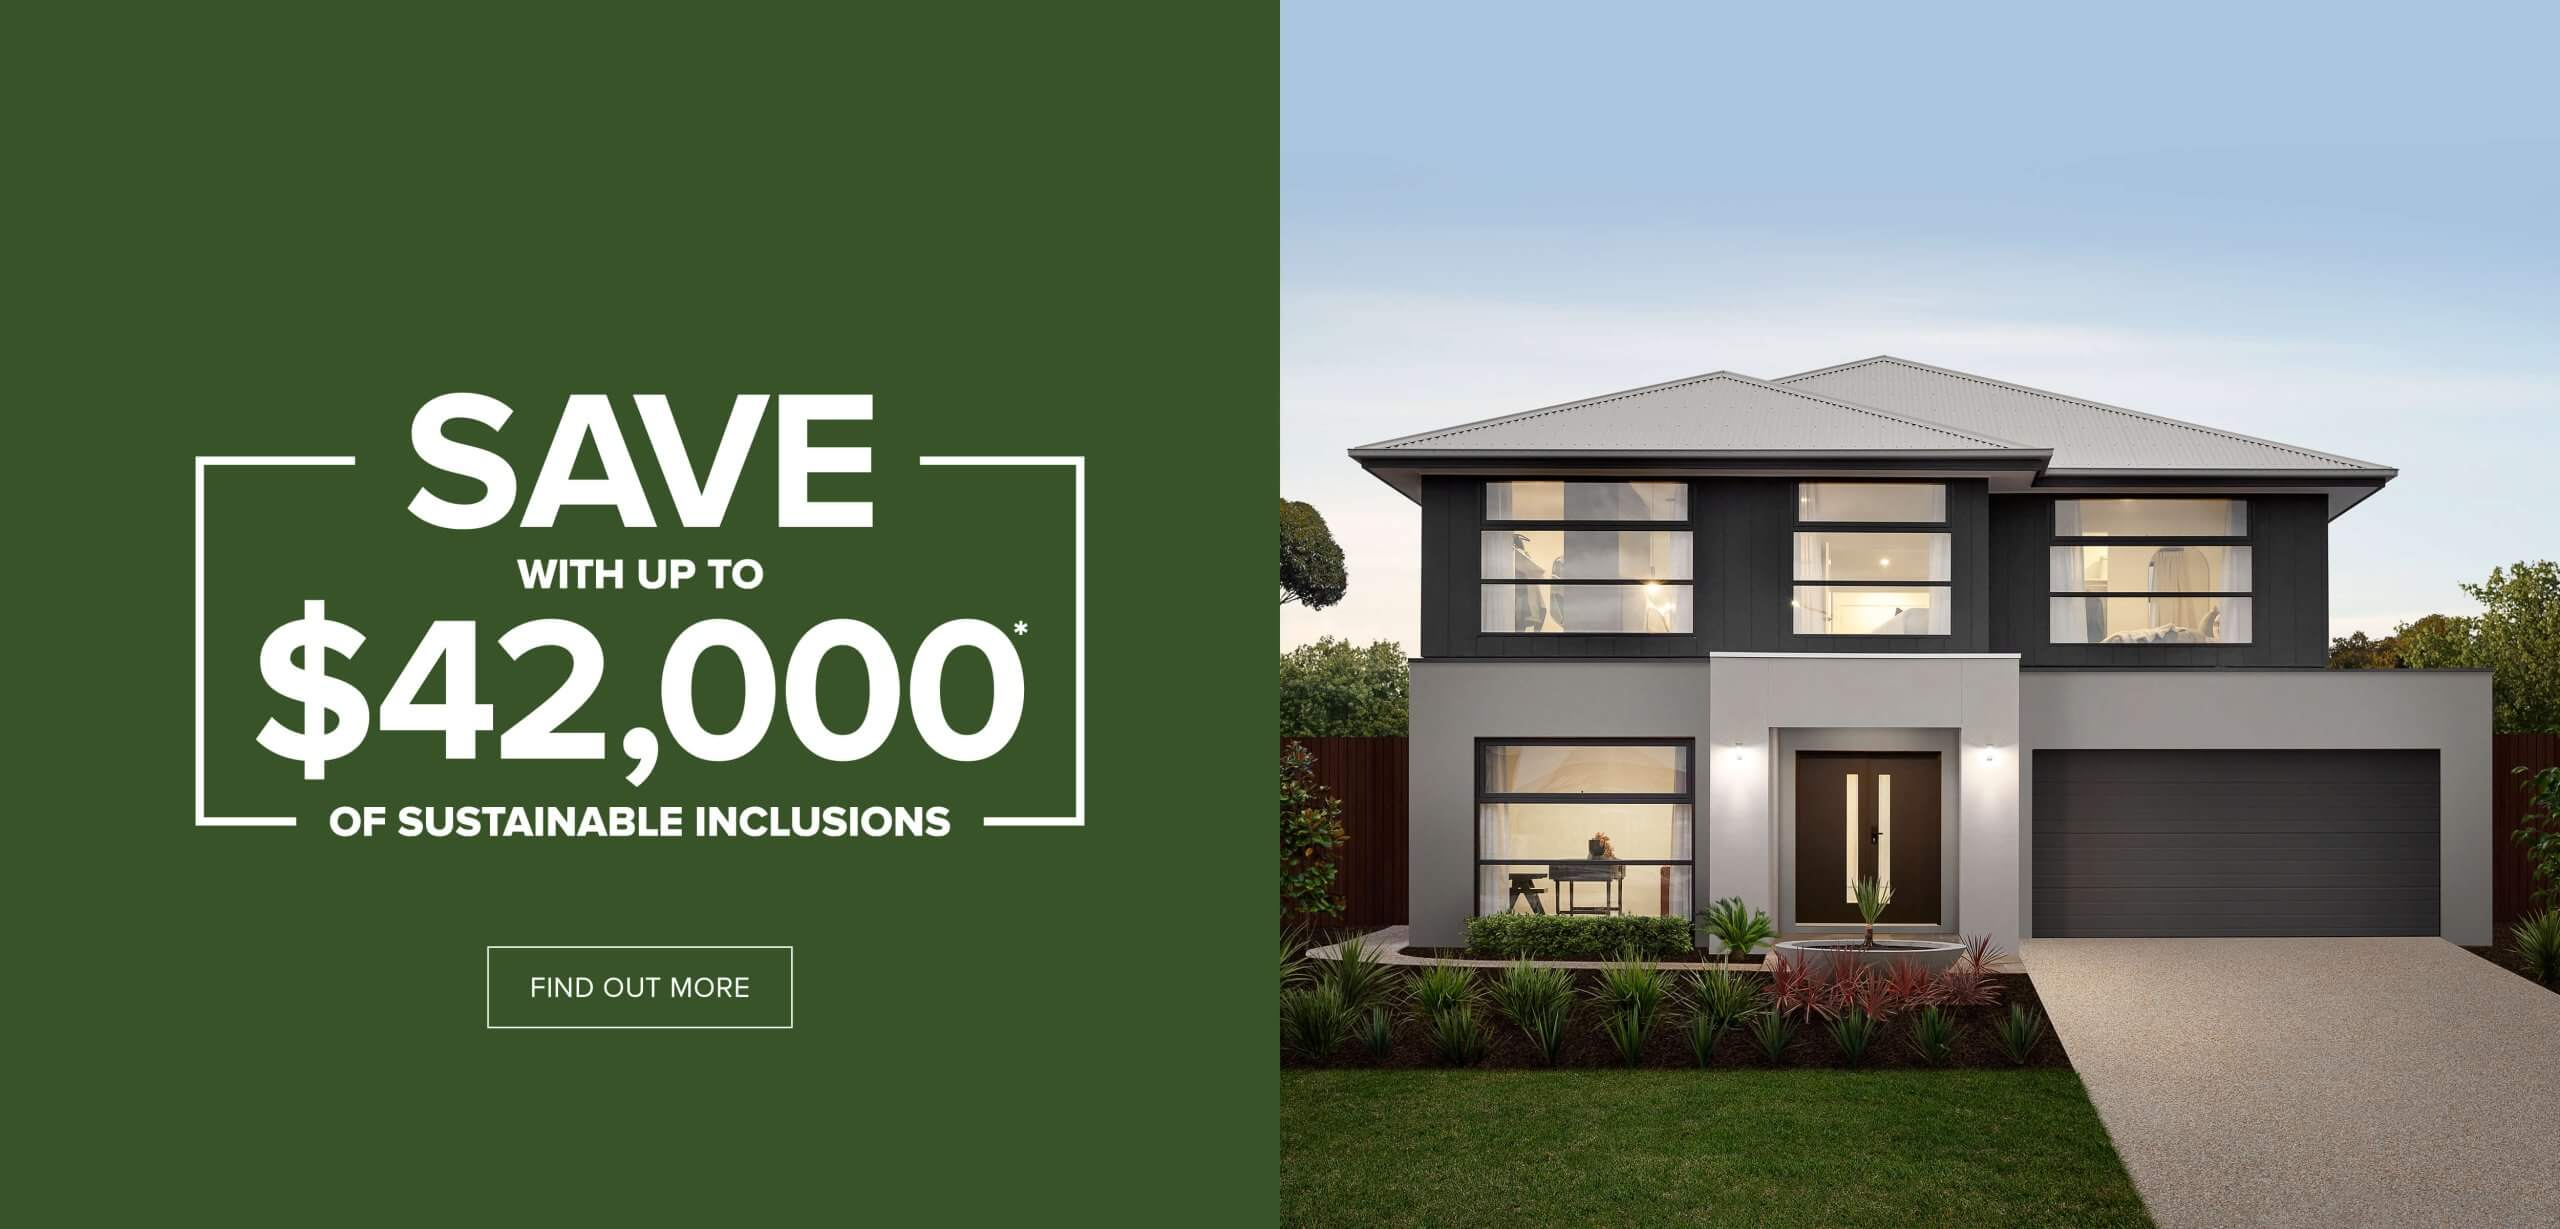 Award winning home builders Melbourne Save with up to $42,000 of sustainable inclusions.